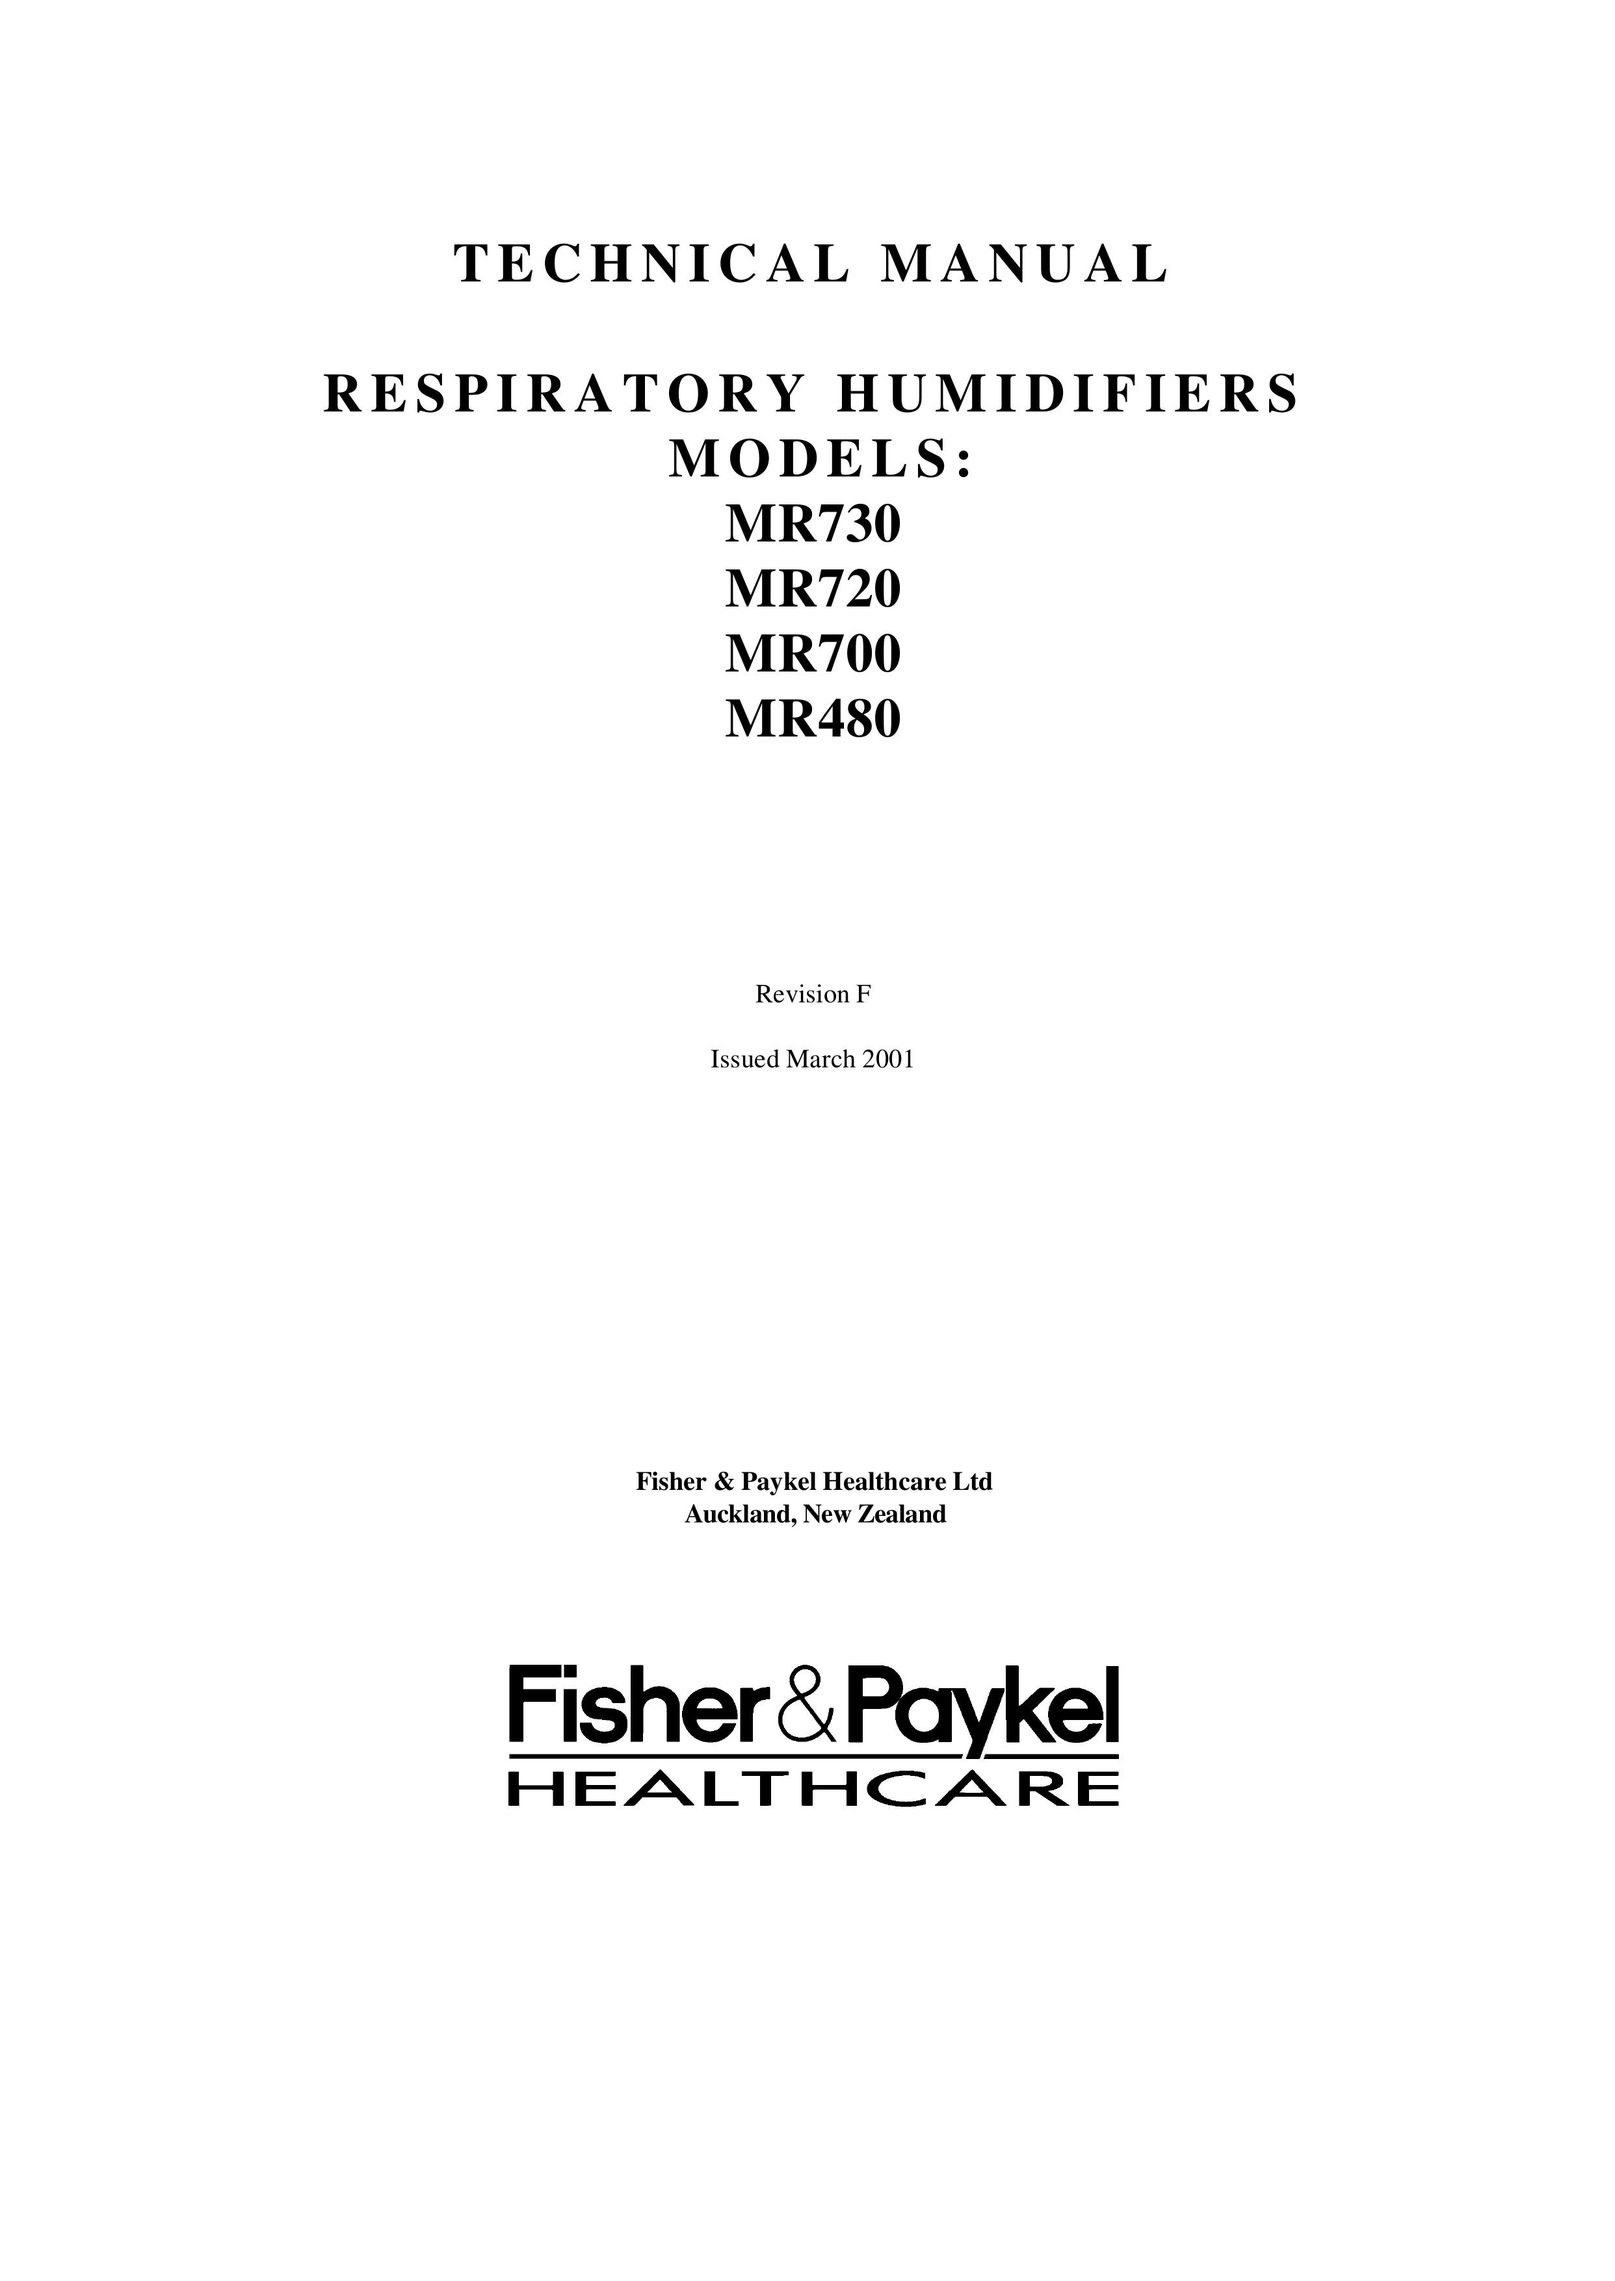 Fisher & Paykel MR700 Humidifier User Manual